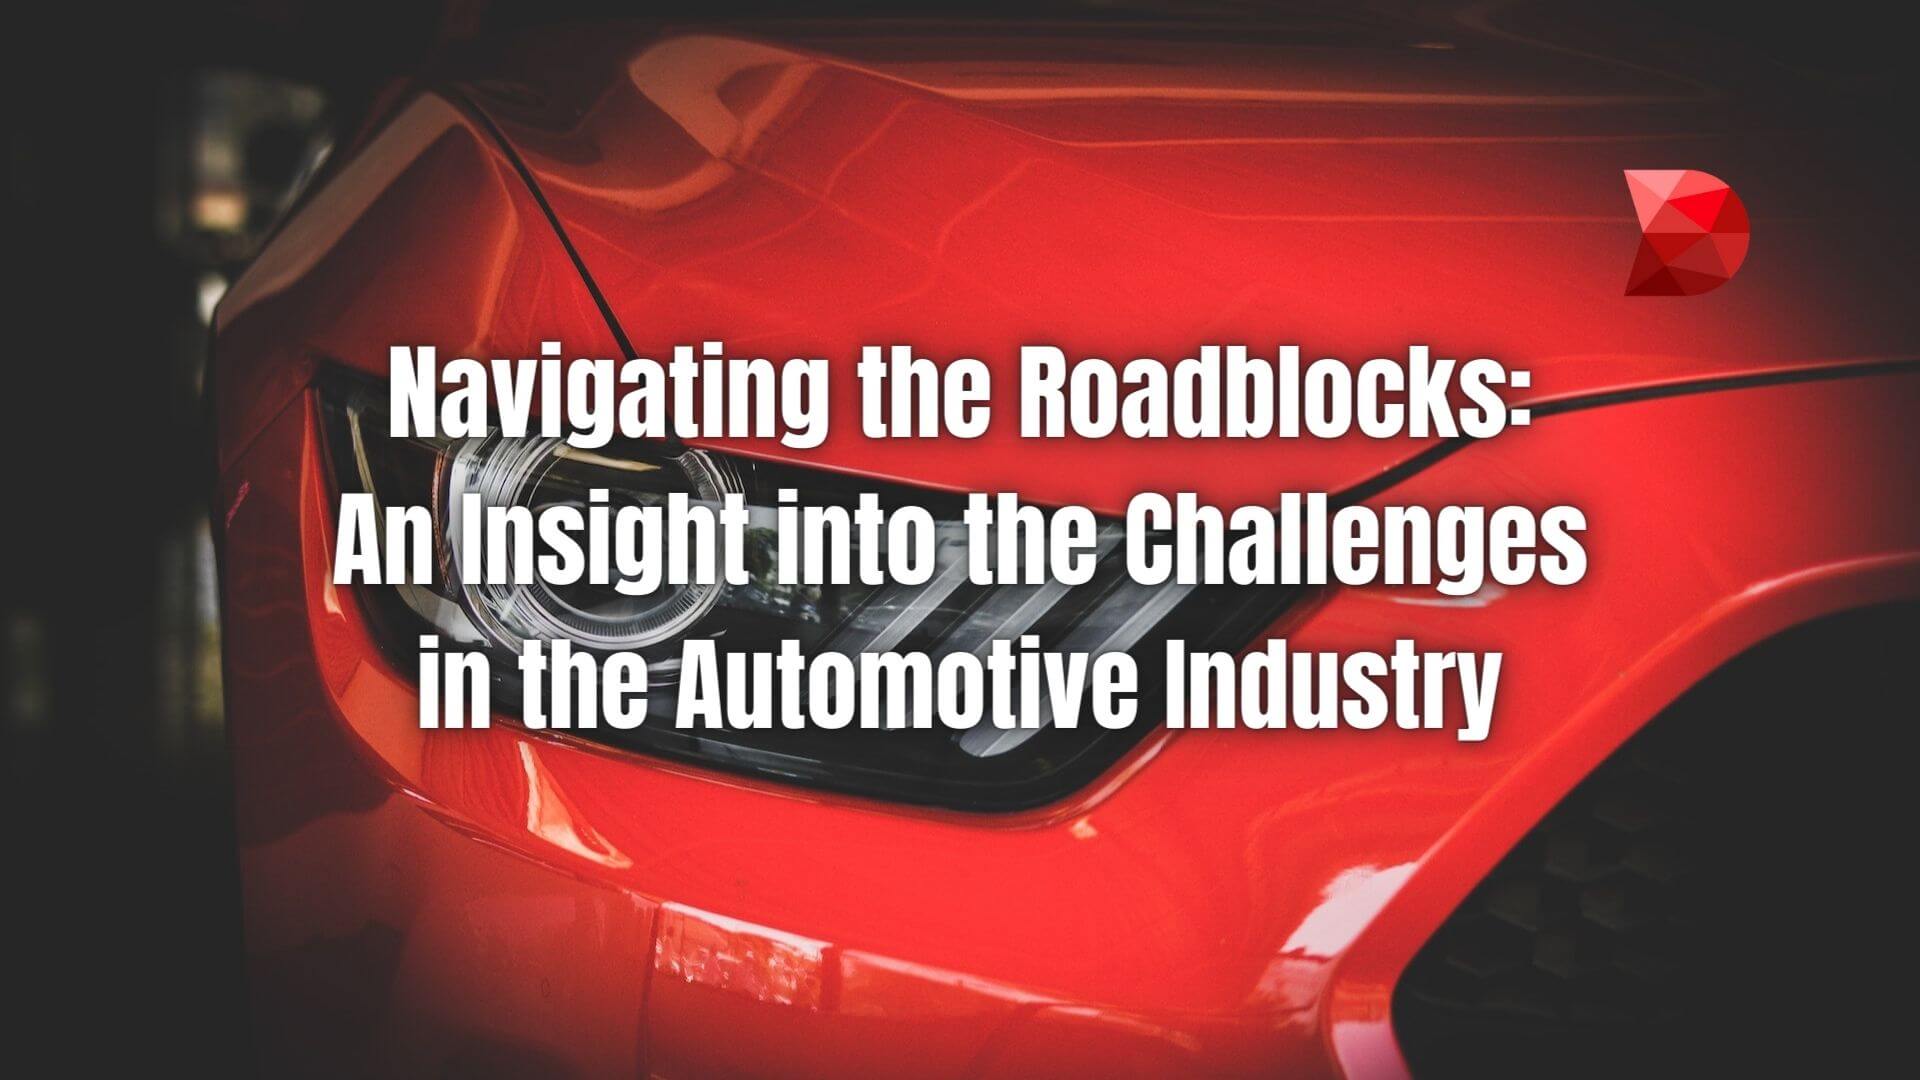 Overcome challenges in the automotive industry. Click here to learn practical tips and tactics for sustainable growth and prosperity.